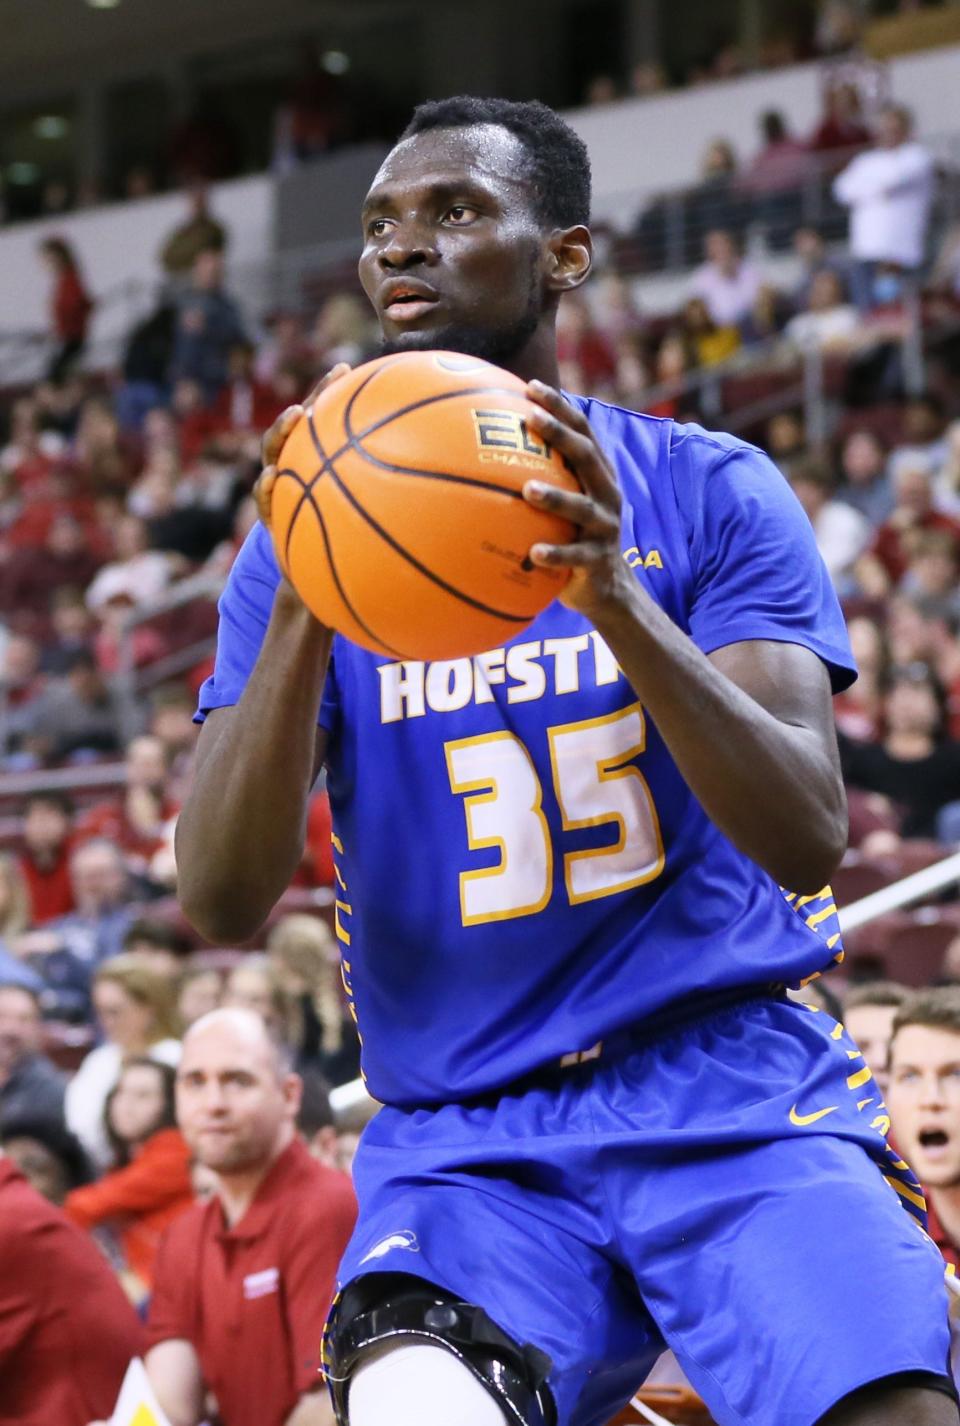 Kansas State's basketball roster finally reached double digits Friday with the signing of Hofstra graduate transfer Abayomi Iyiola.